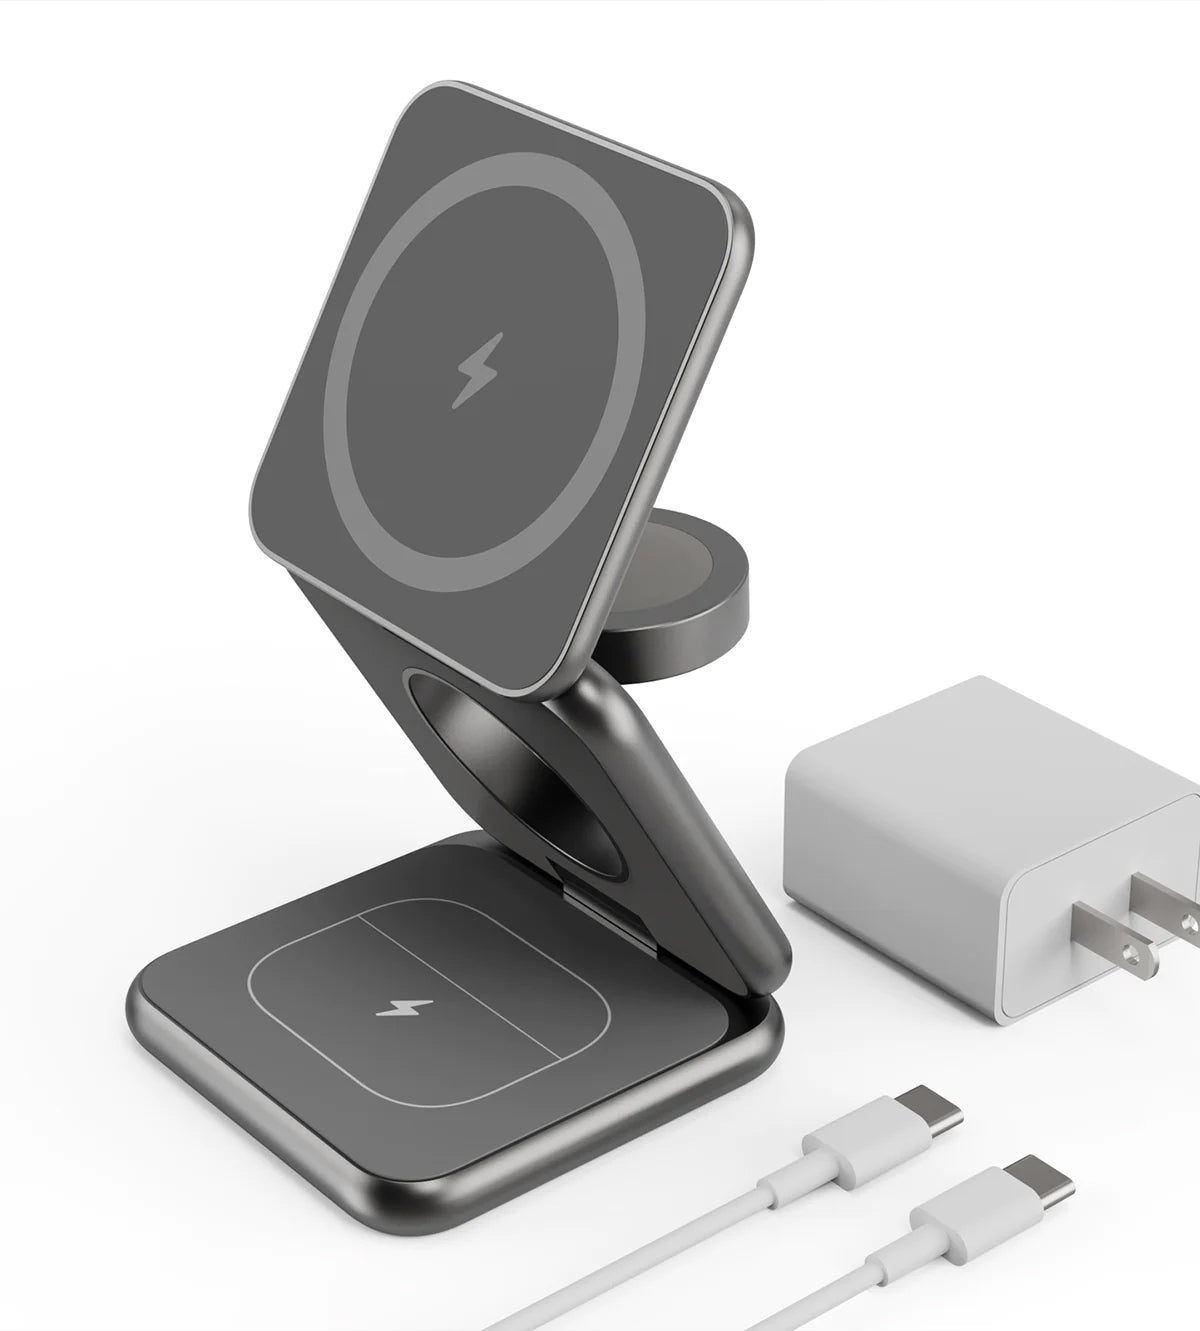 KUXIU X40 3-in-1 foldable magnetic wireless charger & stand Kit